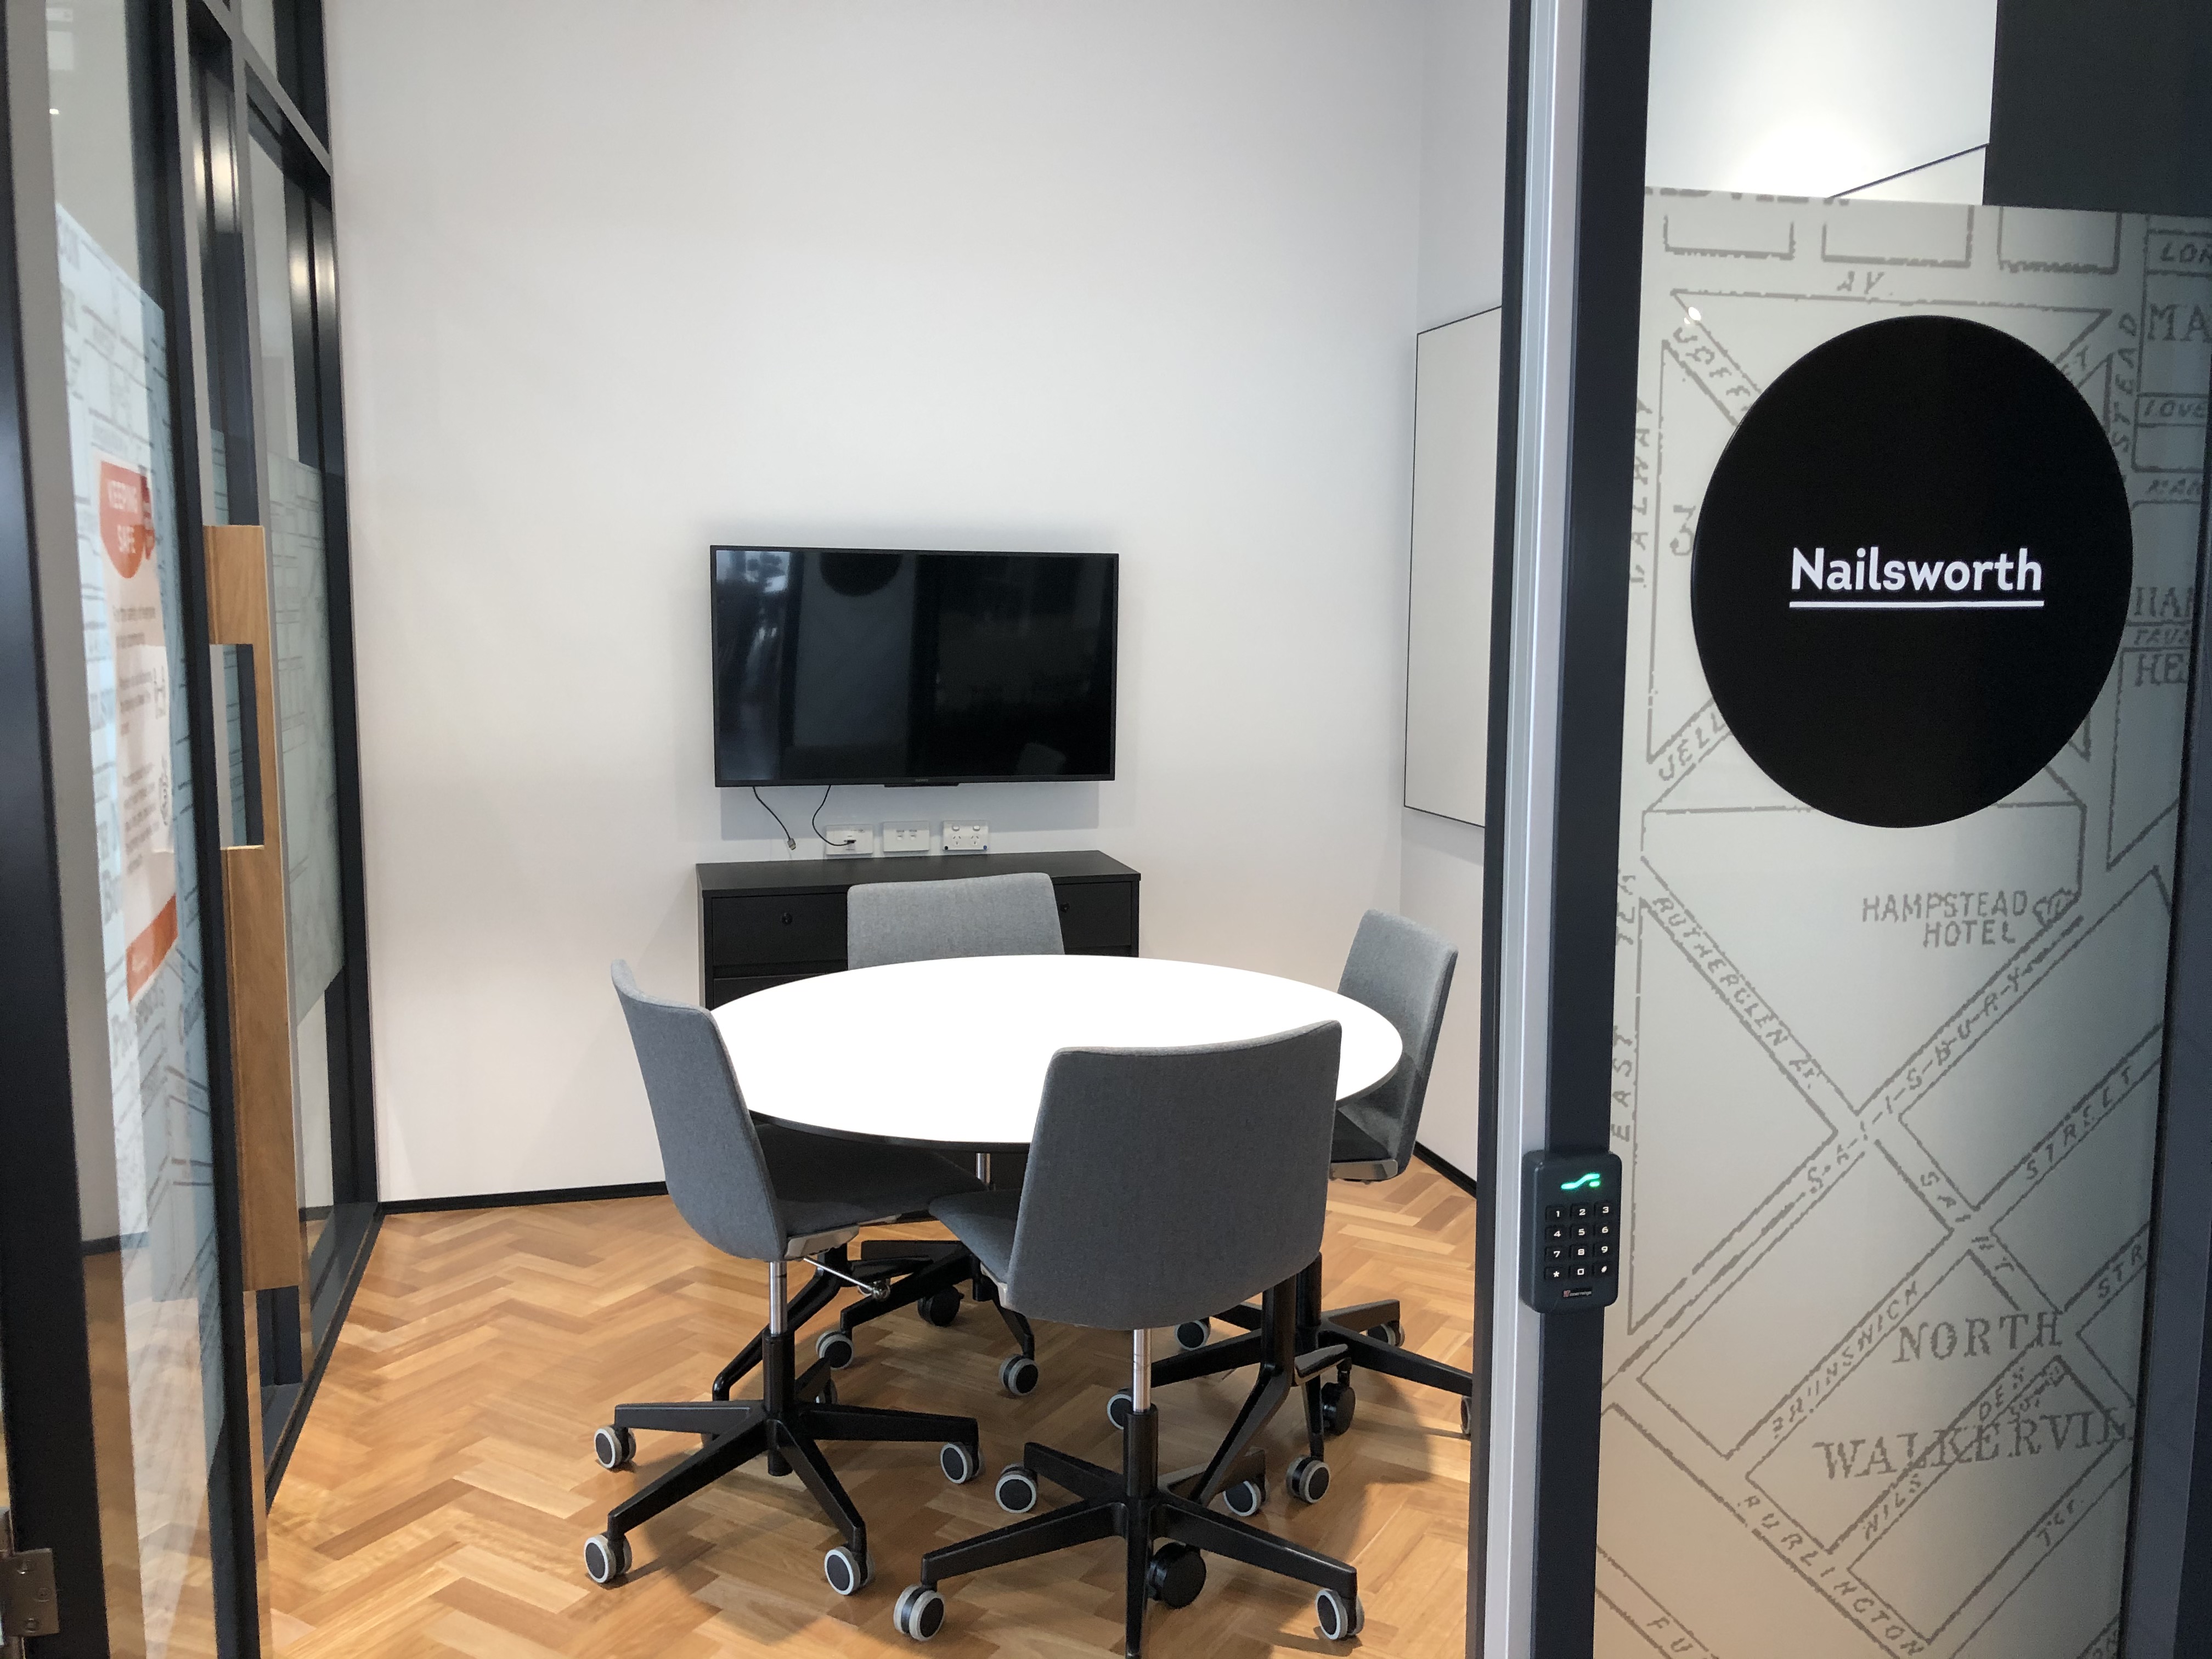 A view of the Nailsworth Meeting Room